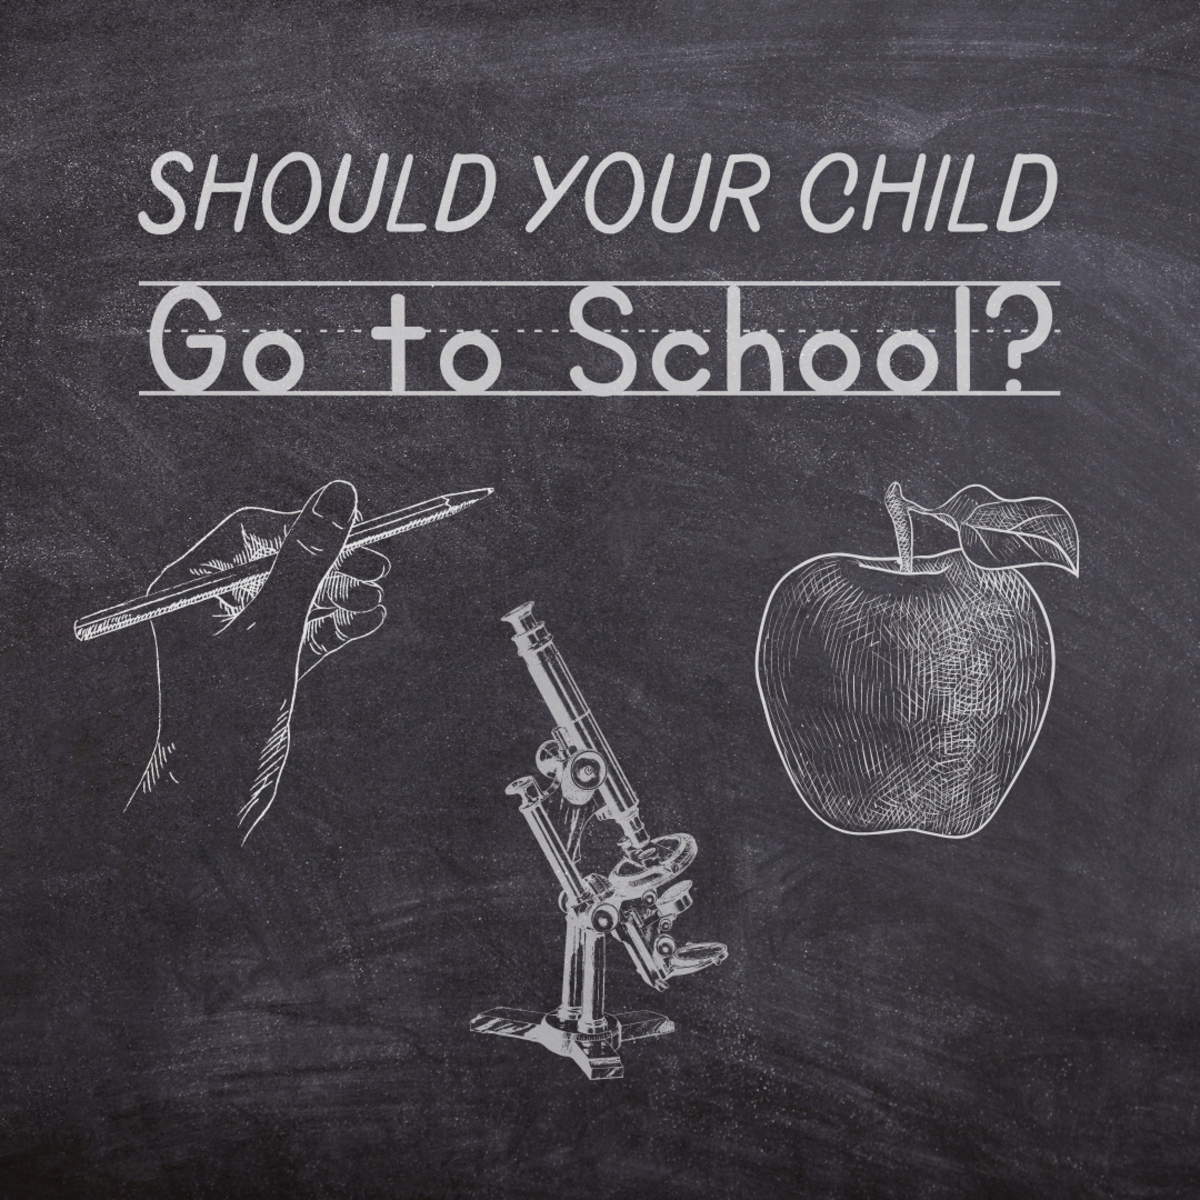 9 Reasons Your Child Should Not Go to School